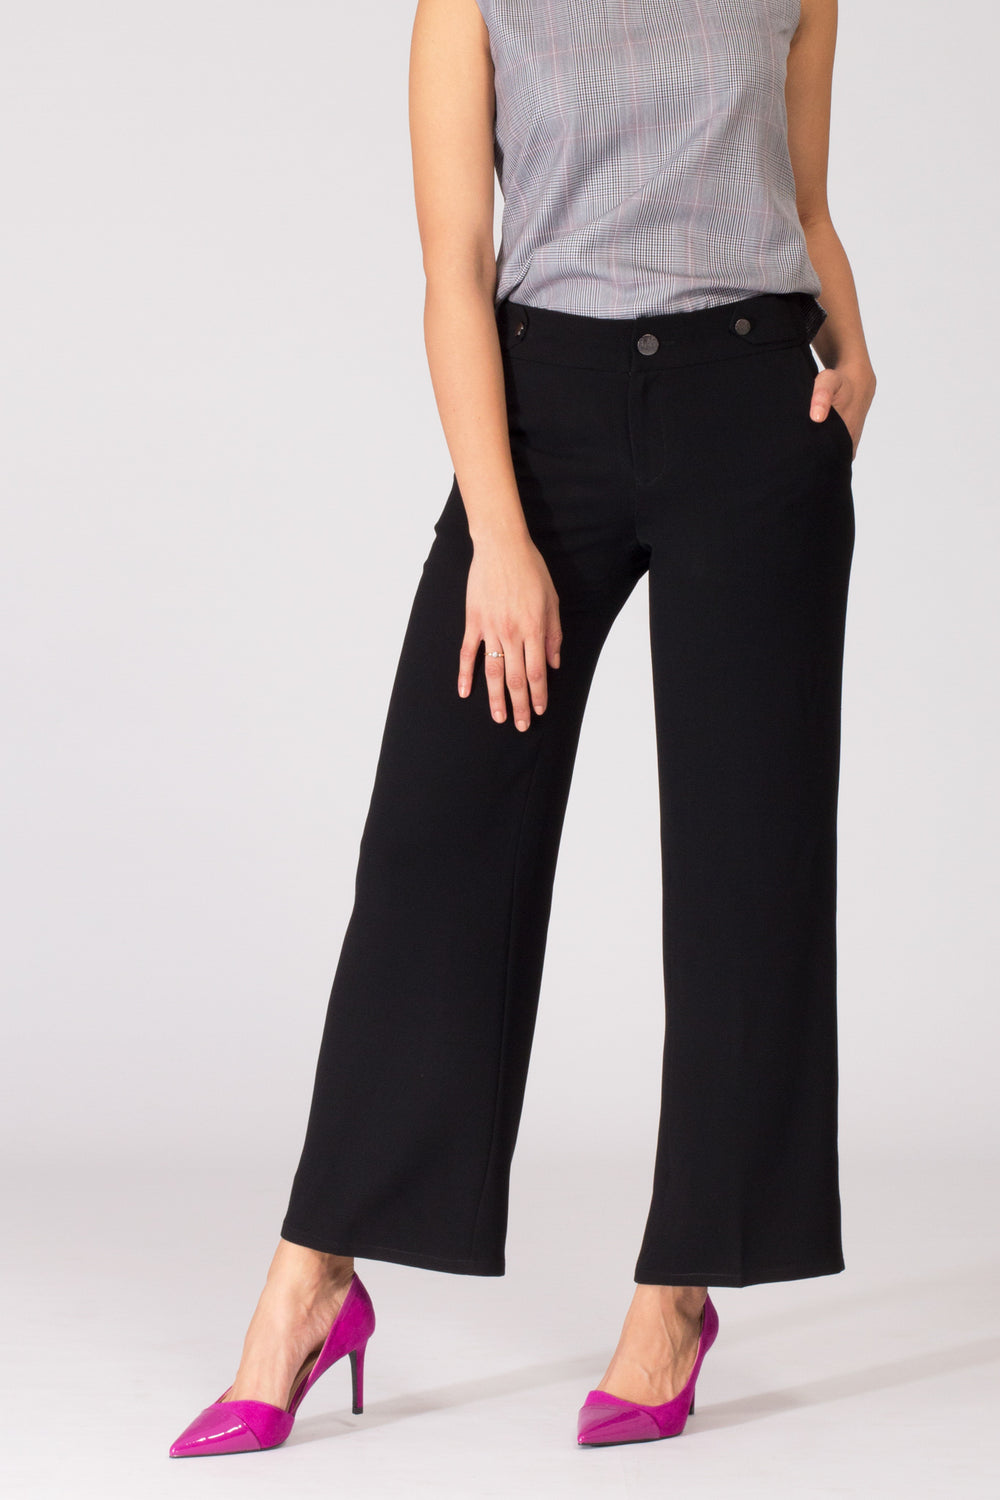 How To Style Athleta's Black Linen Wide-Leg Pants - The Mom Edit